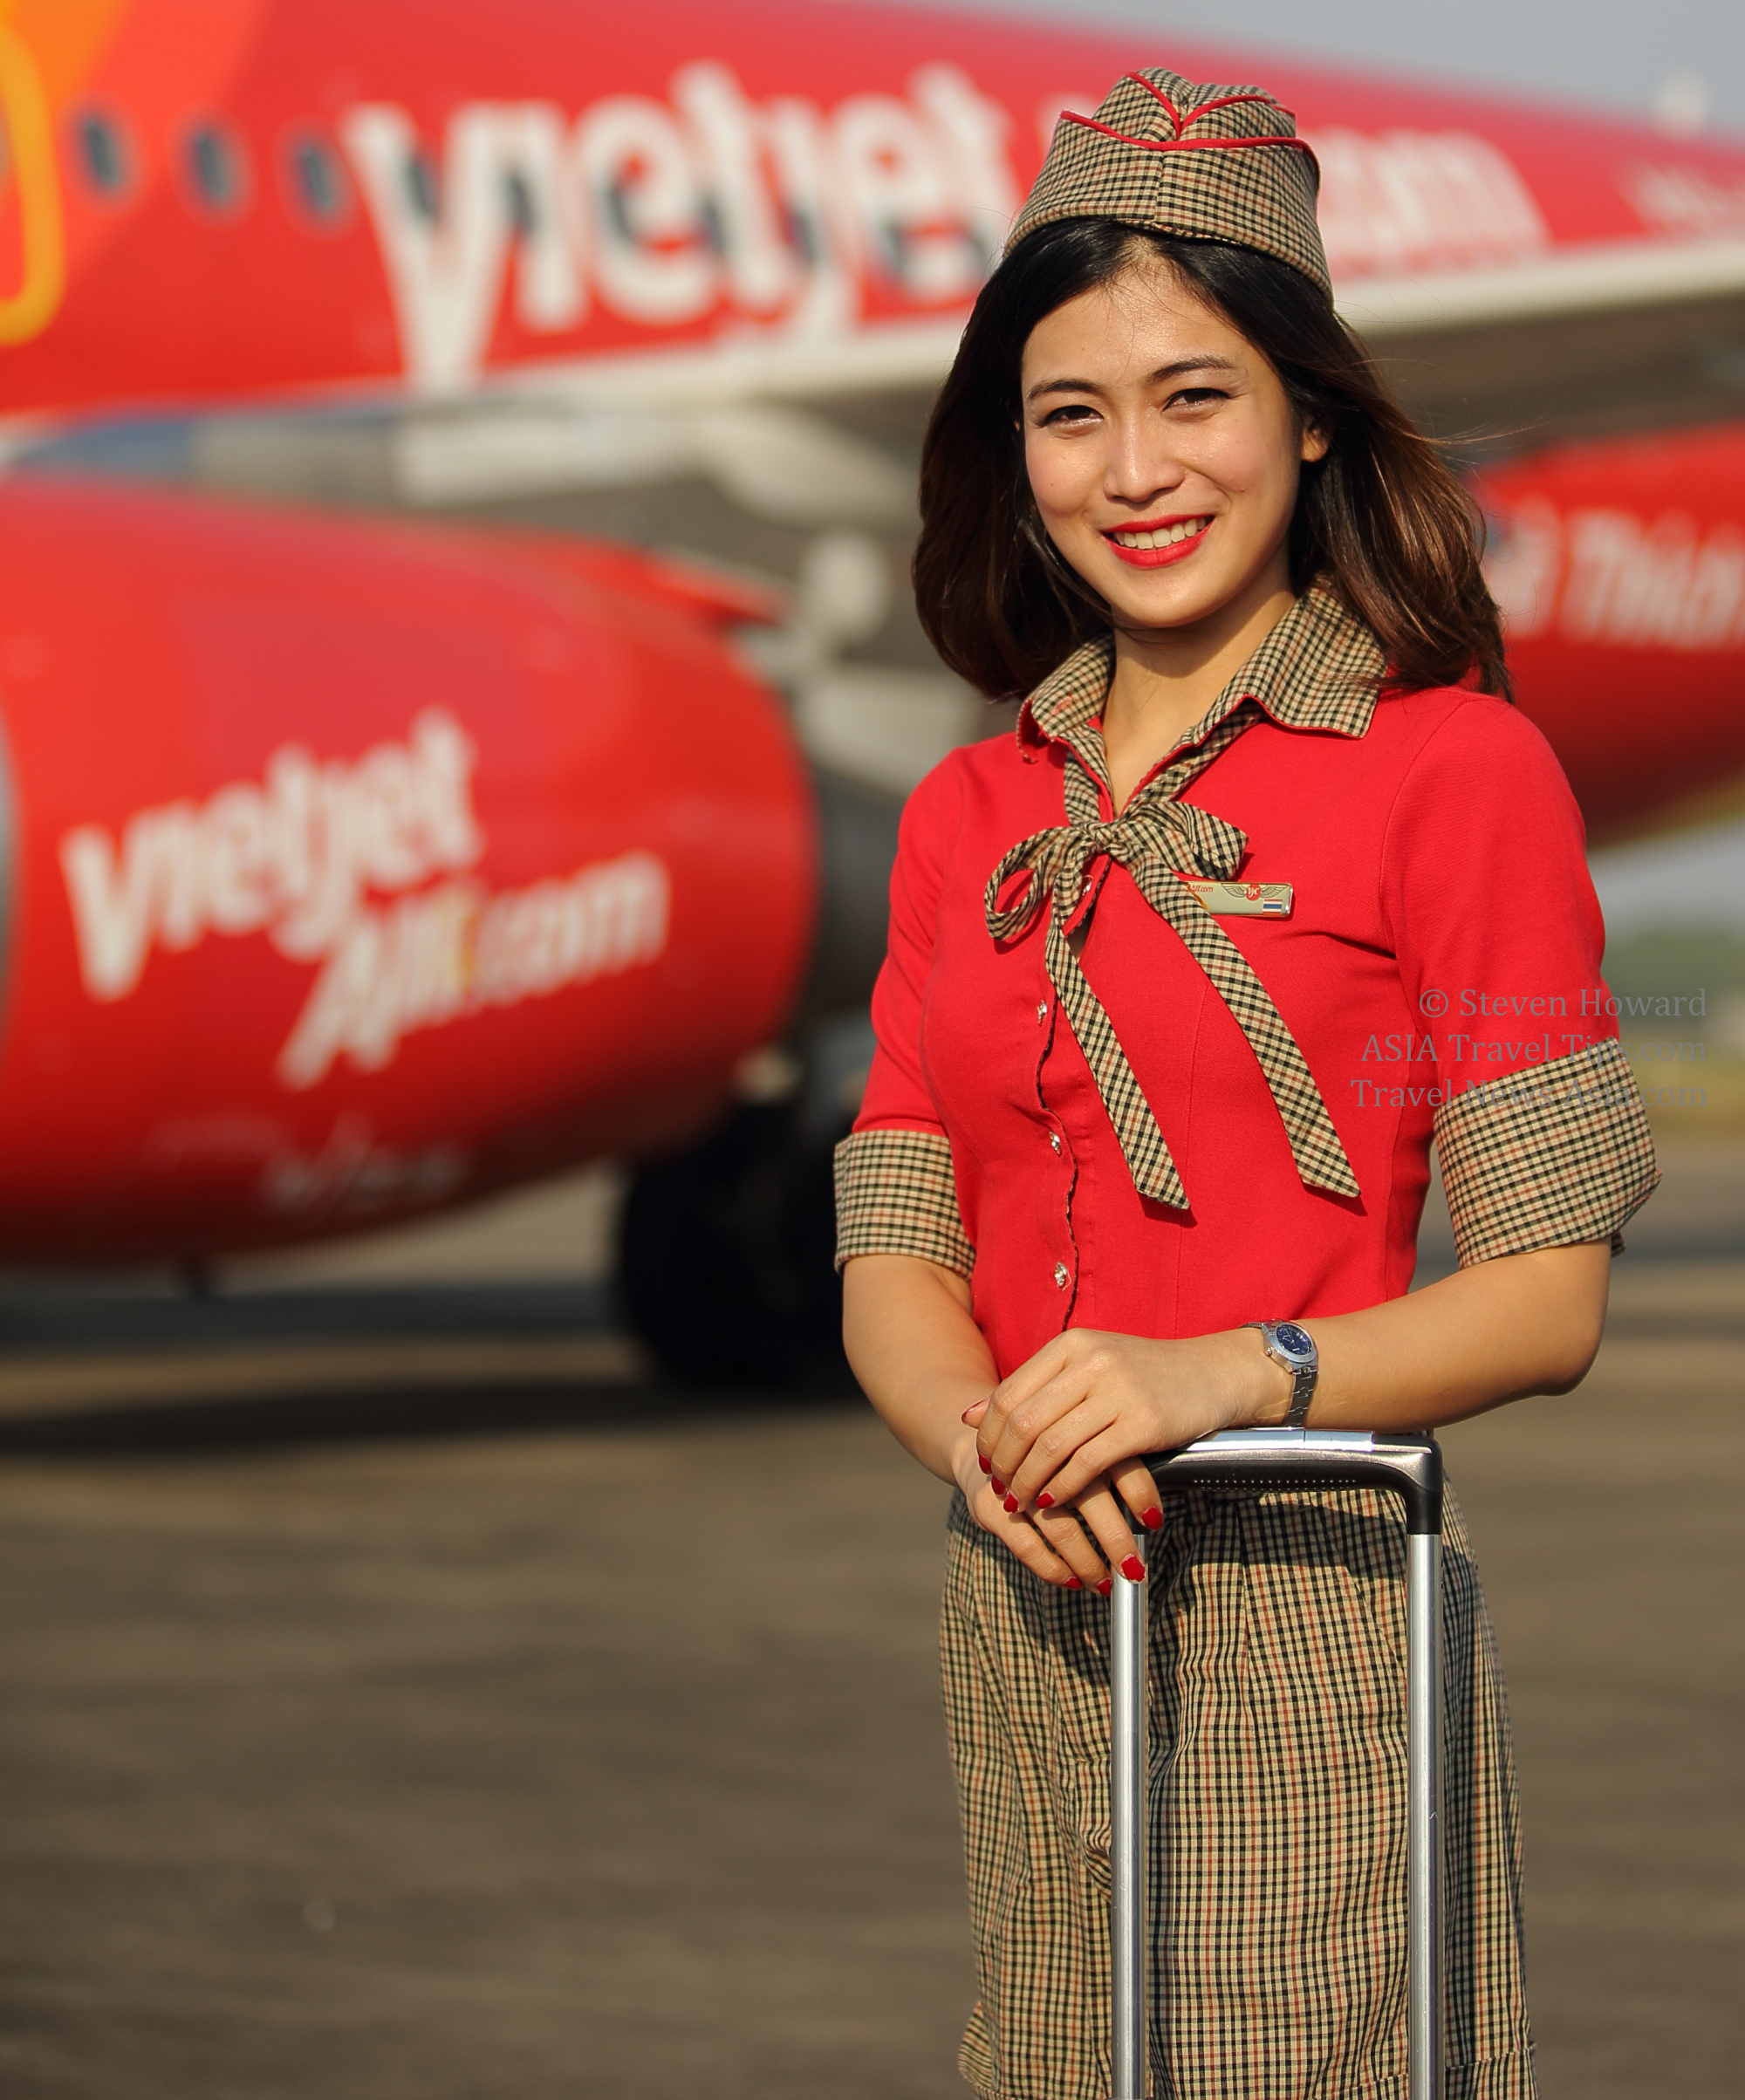 Vietjet has unveiled plans to launch flights between Ho Chi Minh (Saigon) and the Indonesian capital of Jakarta. The Ho Chi Minh - Jakarta route will operate daily from 20 December 2017. Flights will Ho Chi Minh at 20:40 to land in Jakarta at 23:40. The return flight will depart from Jakarta at 01:40 and land in Ho Chi Minh at 04:40. Click to enlarge.